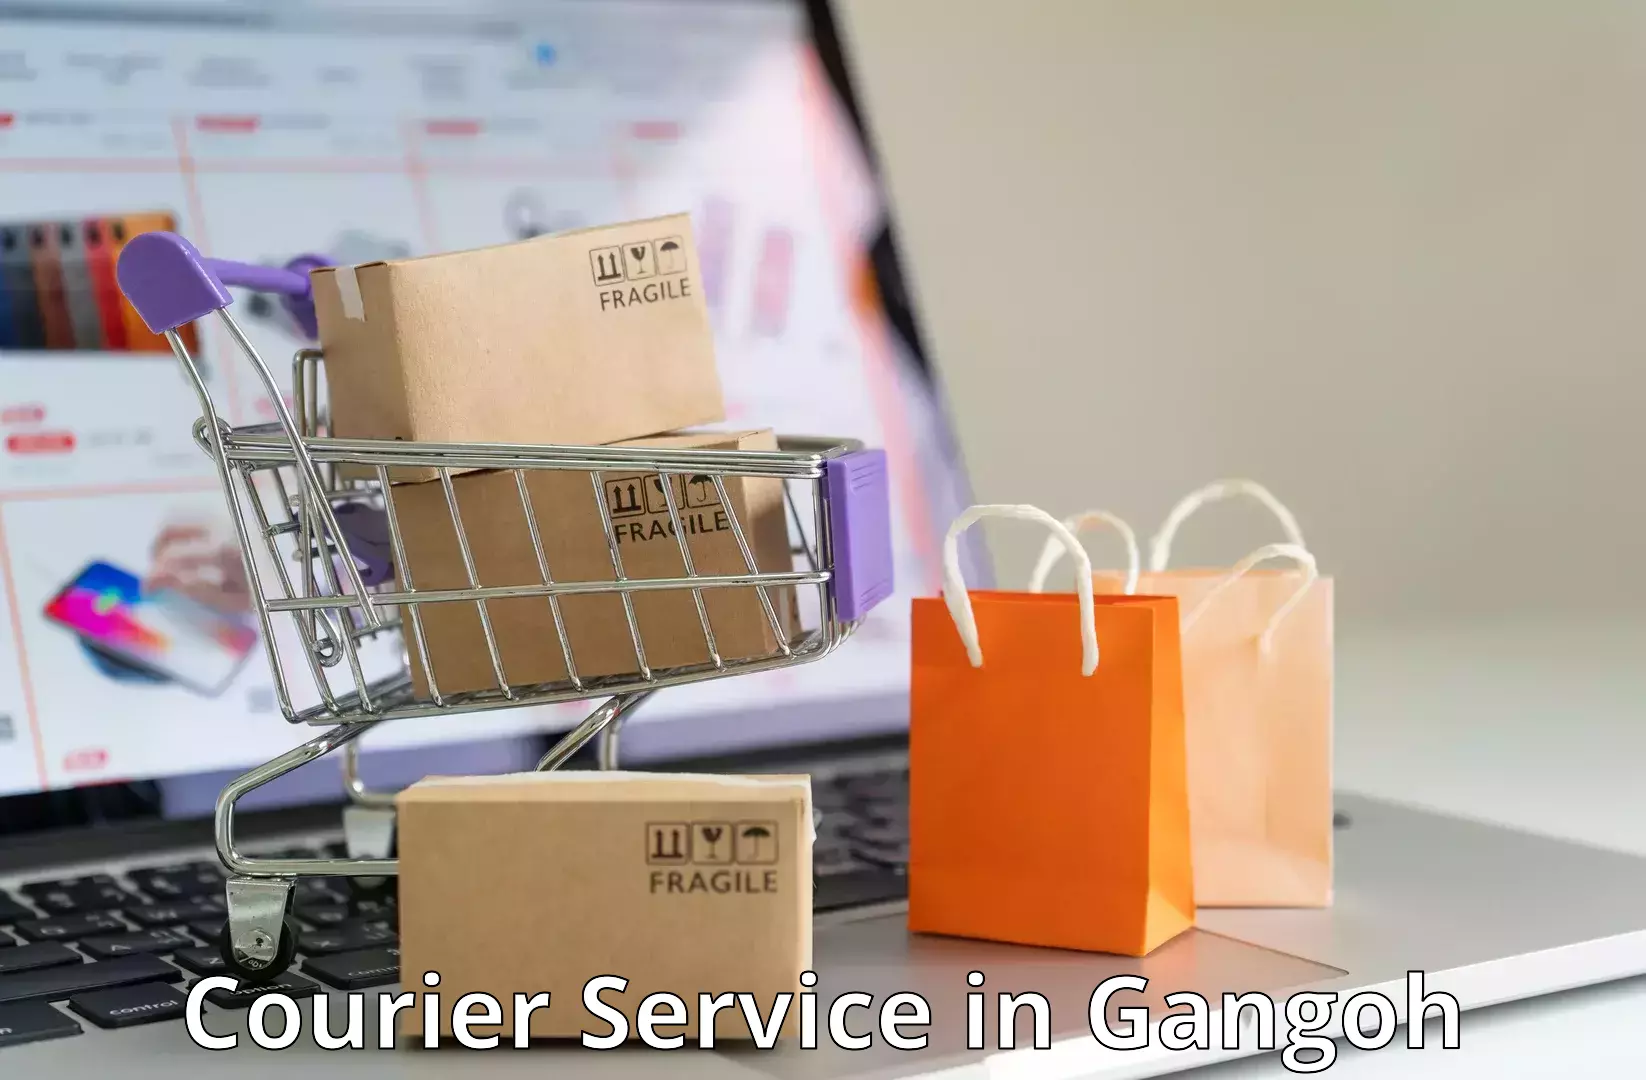 Streamlined delivery processes in Gangoh